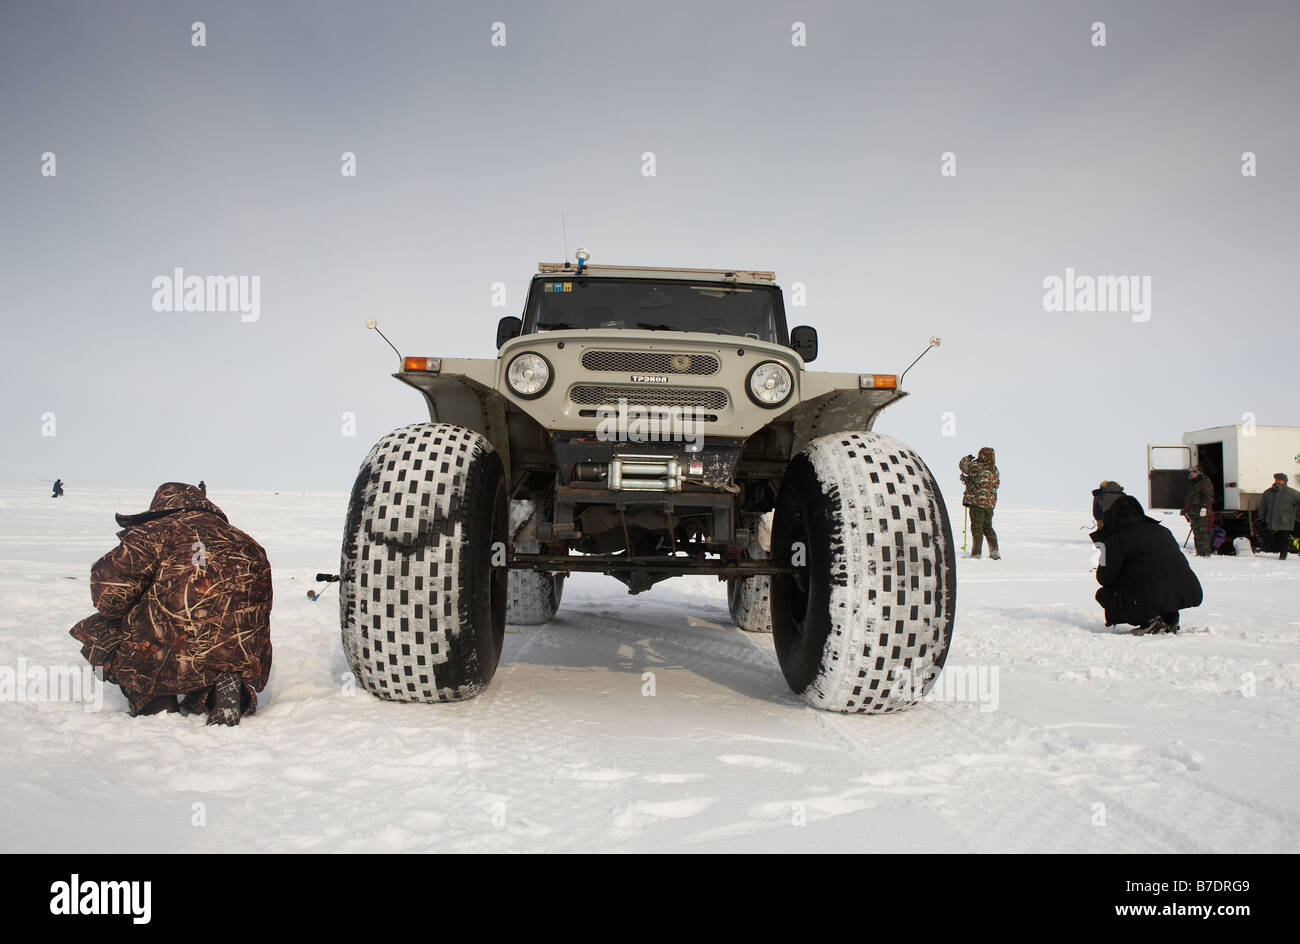 Ice fishing for smelts by modified Jeep,  Anadyr Chukotka, Siberia Russia Stock Photo